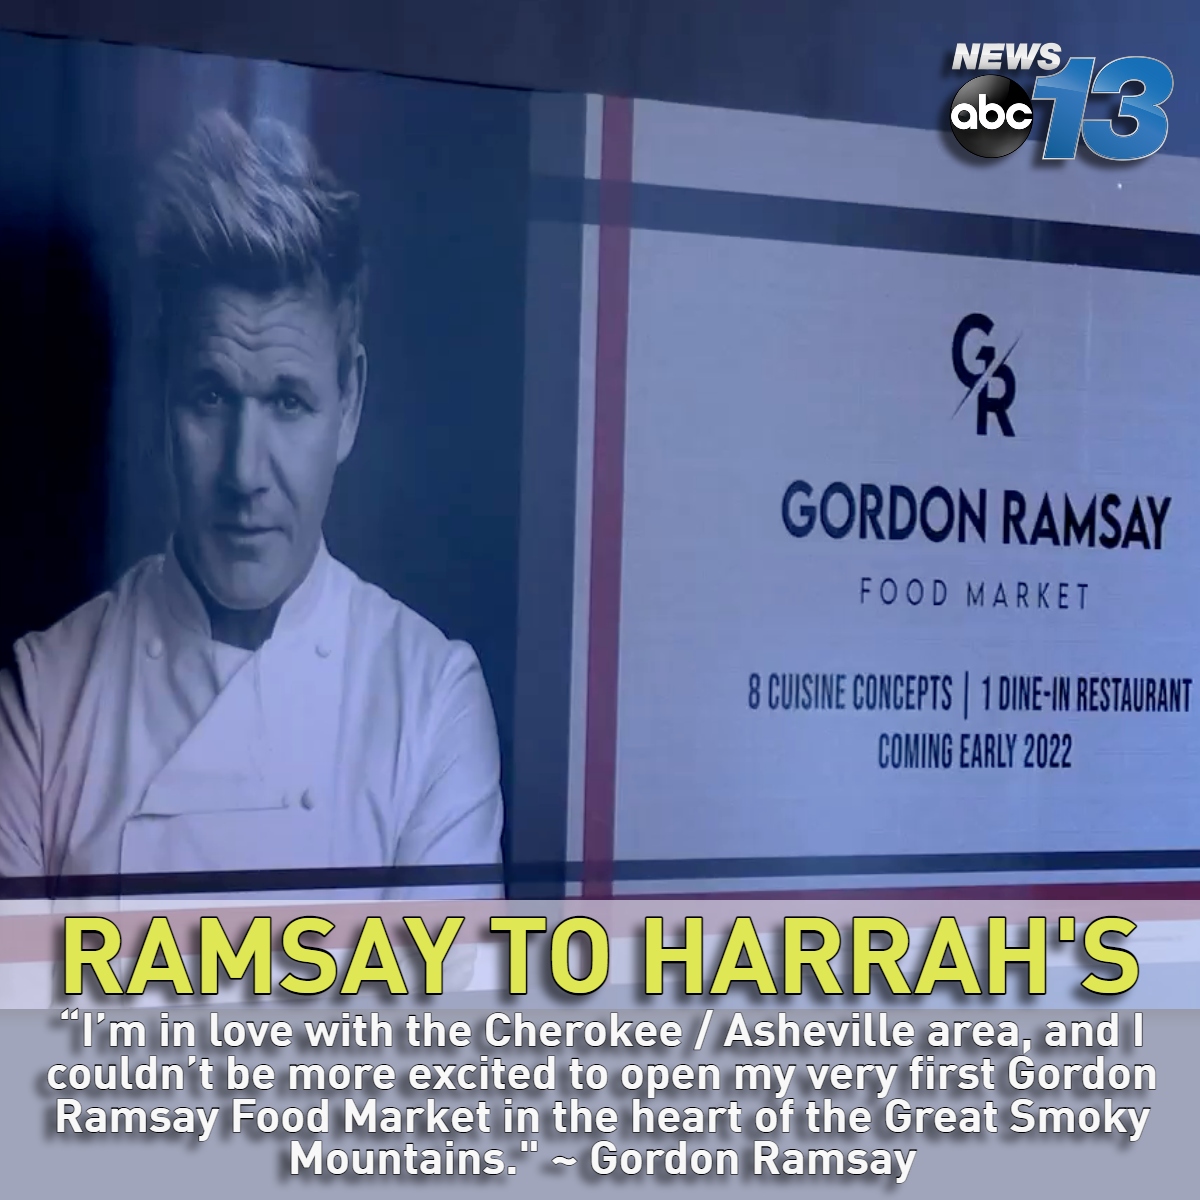 A Gordon Ramsay Food Market is expected to join the food court at Harrah’s Cherokee Casino this spring! 
Full story: https://t.co/F2gv2SA14f https://t.co/9K0RLKLDX0